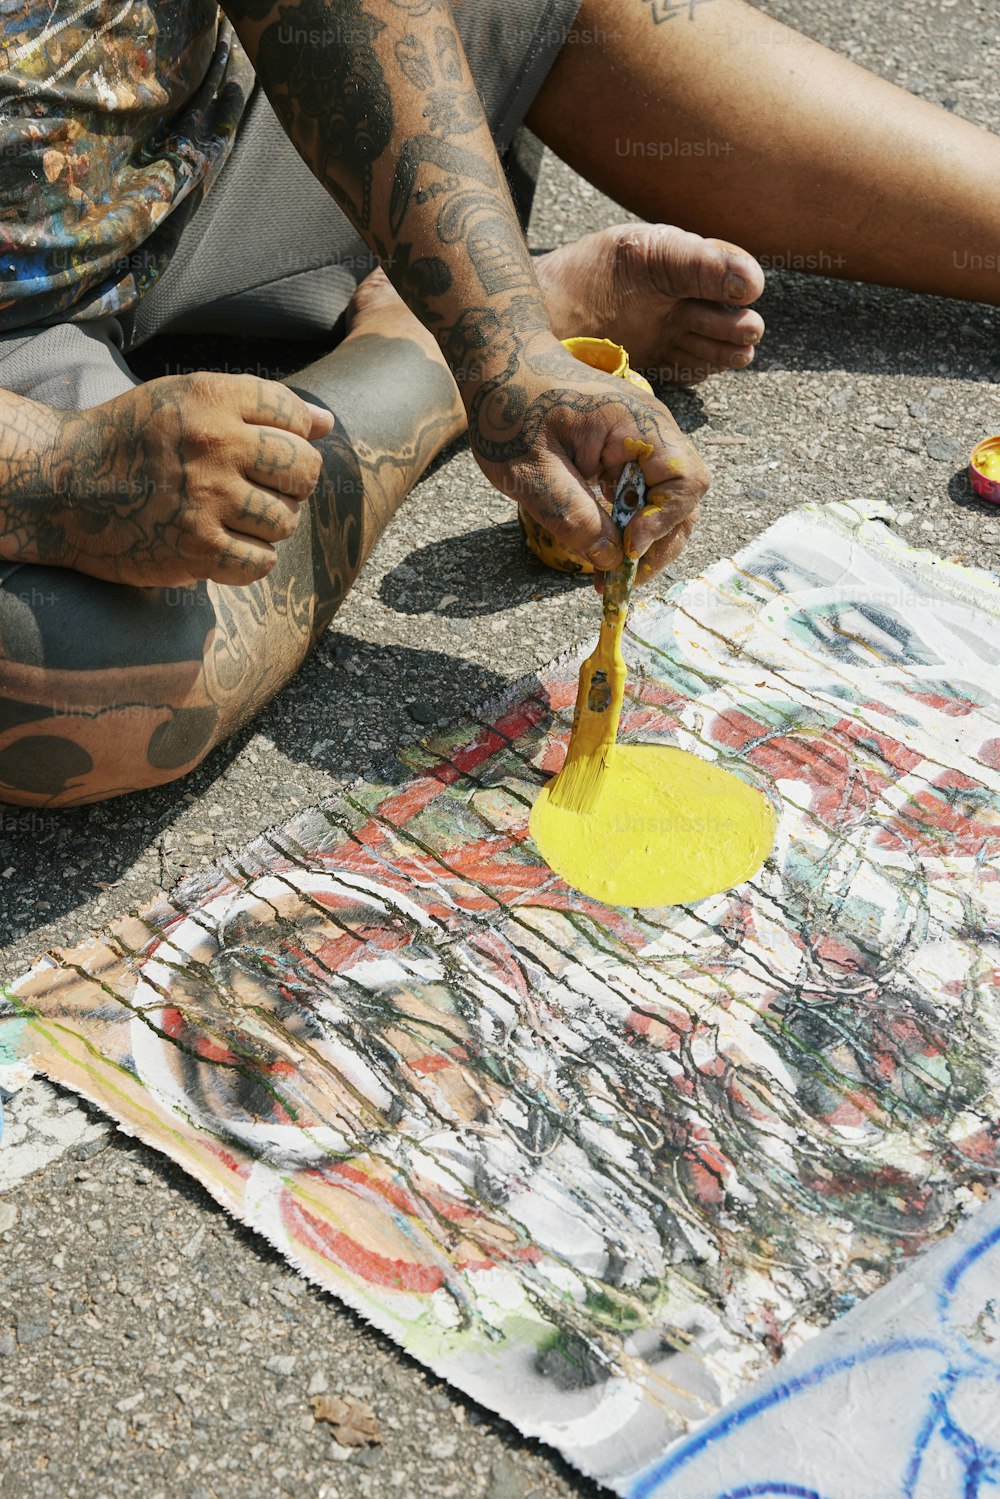 a man sitting on the ground with tattoos on his arms